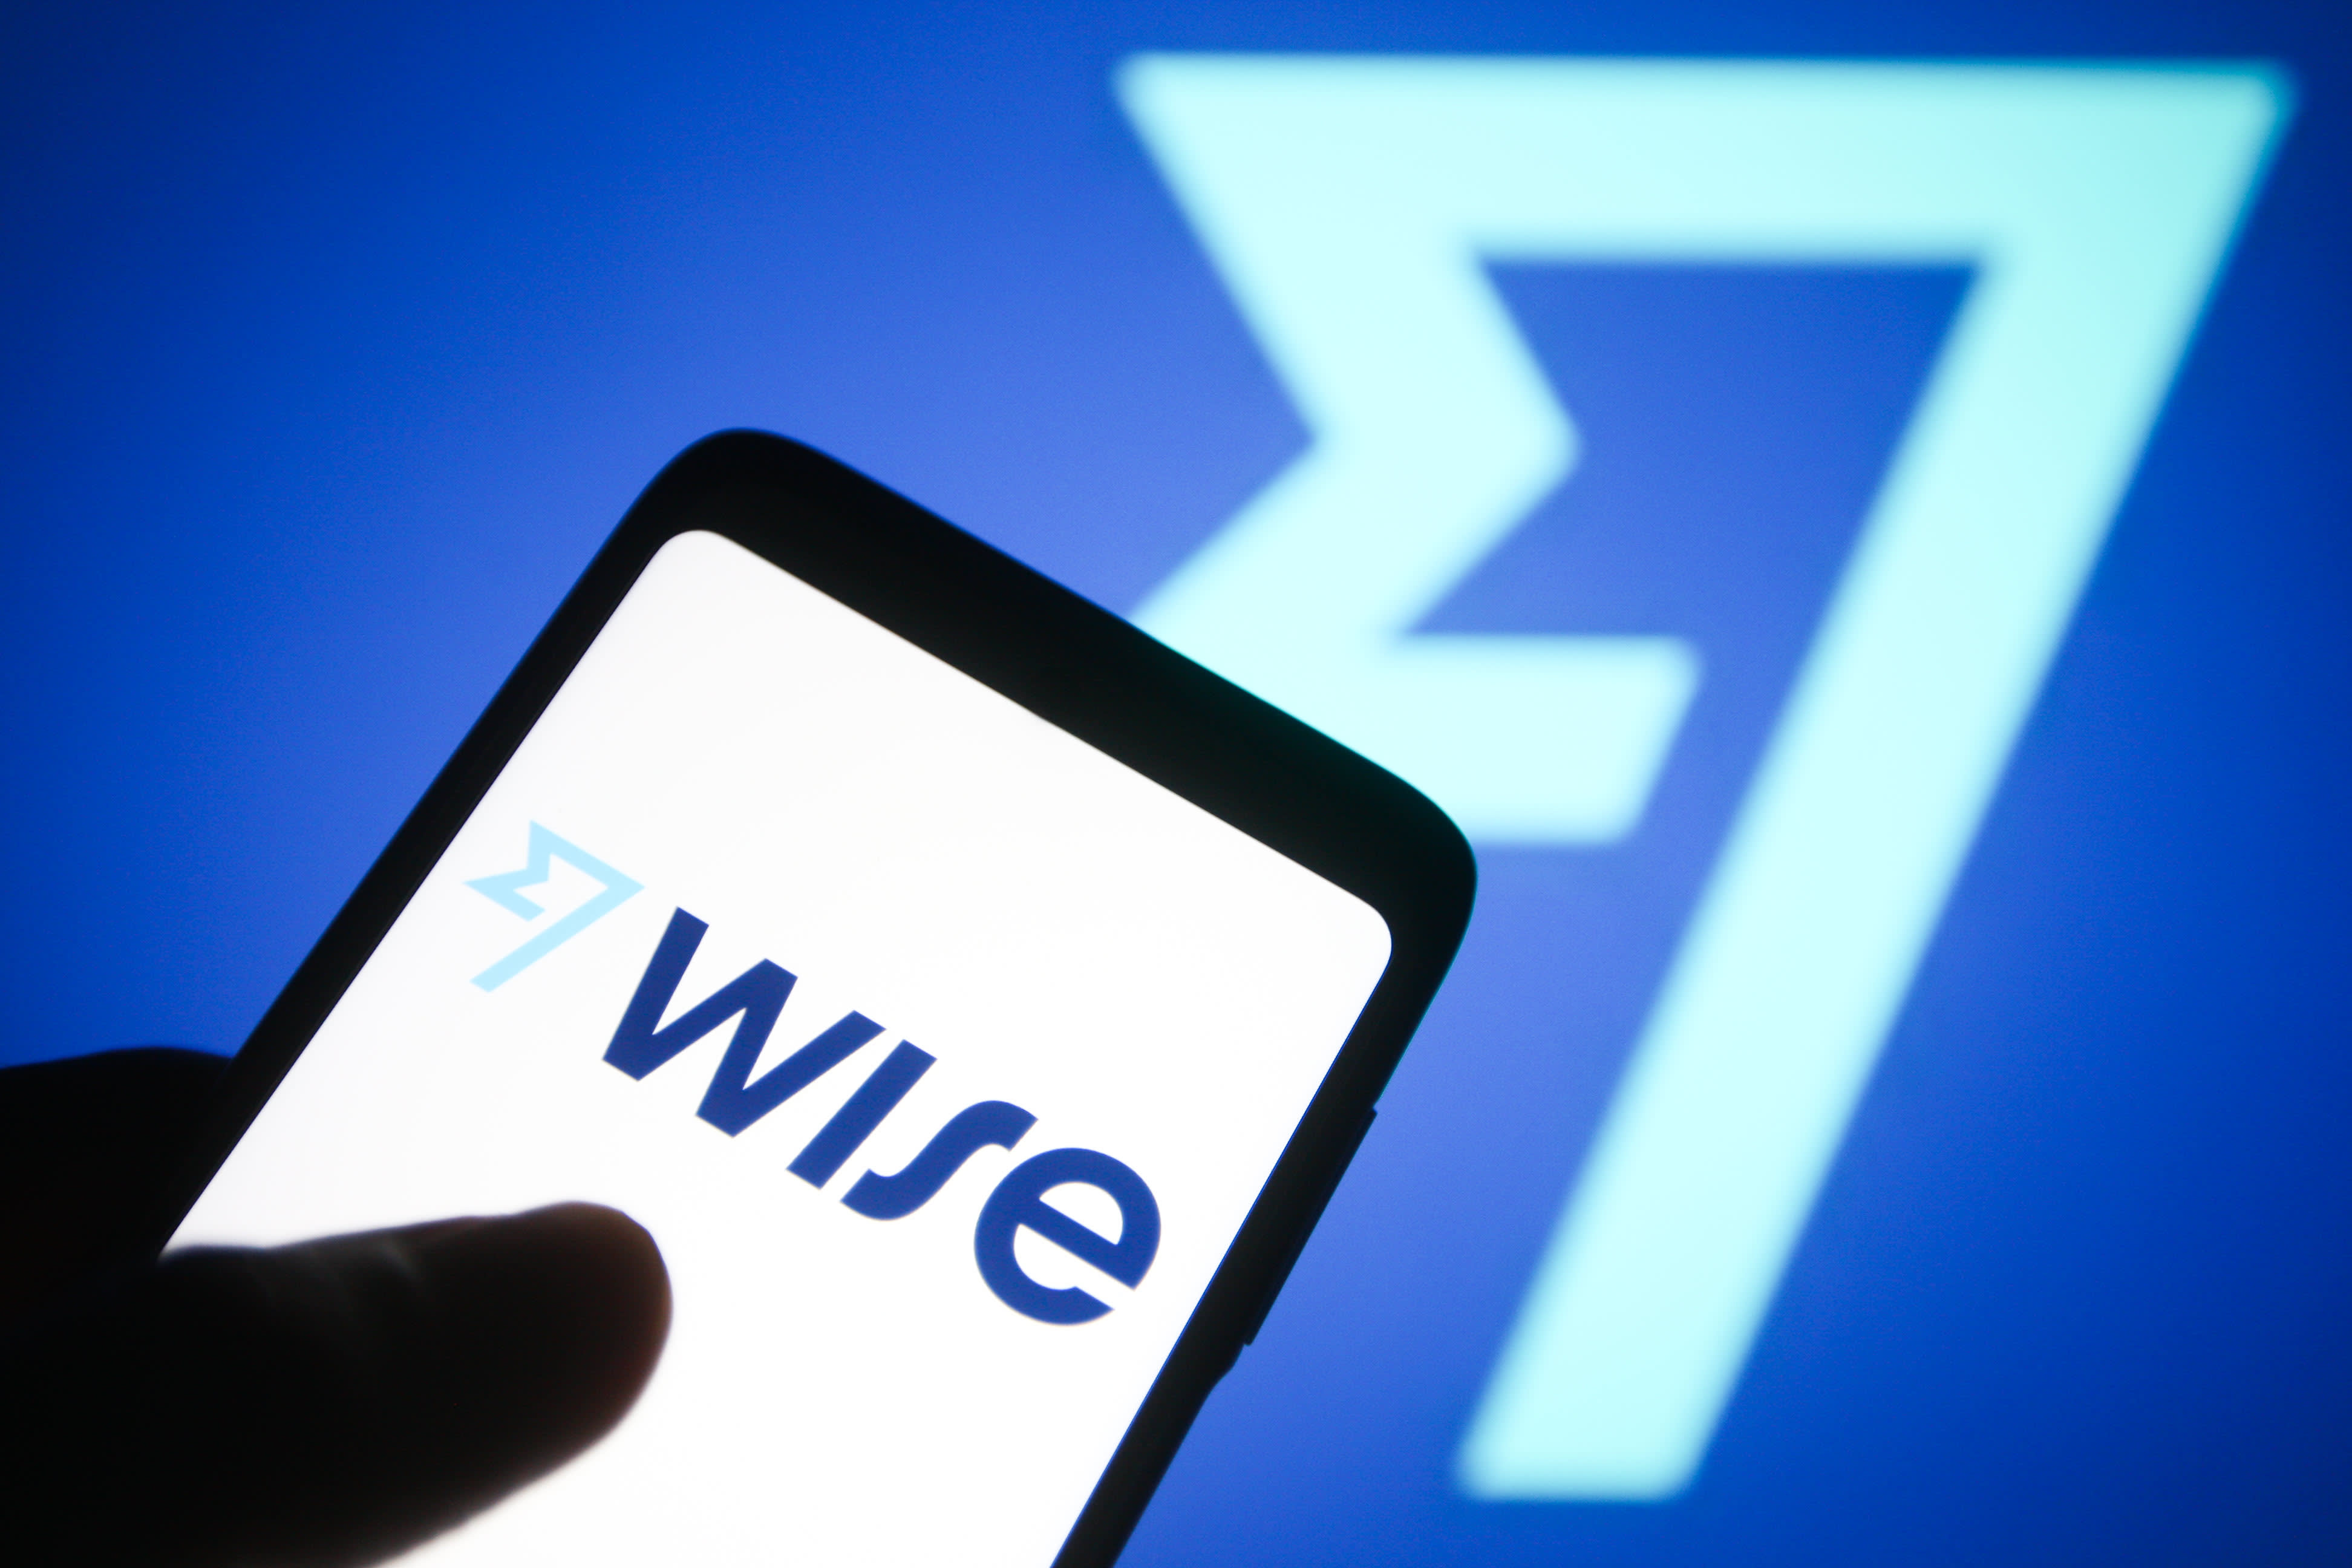 Wise starts trading at £8 a share in London direct listing, valuing fintech giant at £8 billion